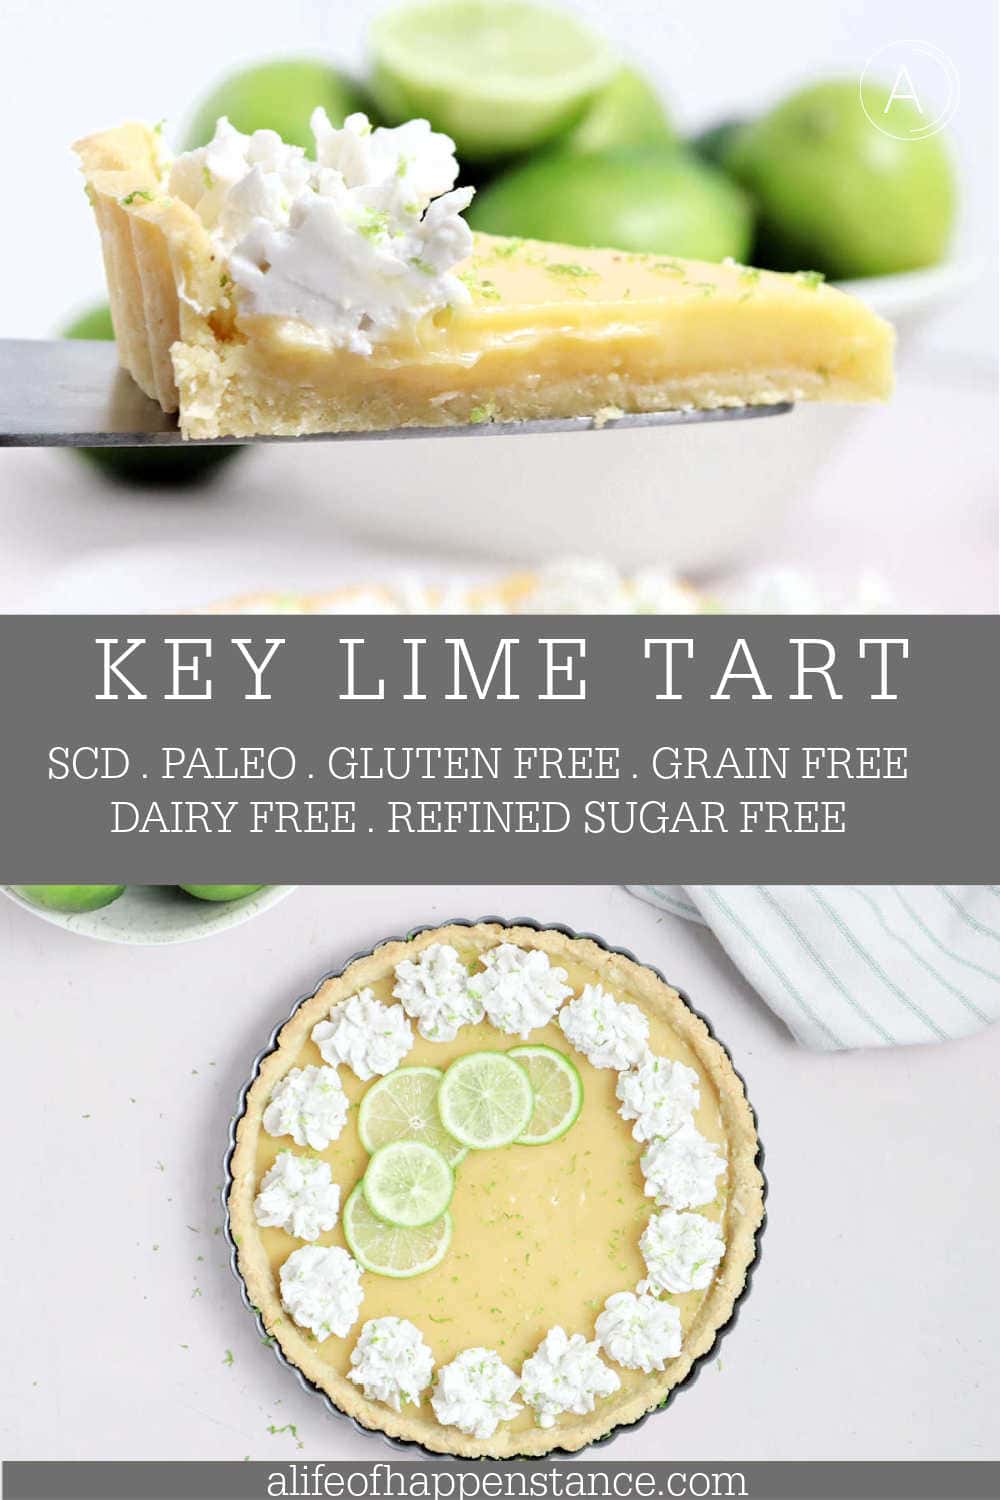 This Key Lime Tart recipe has a crisp almond coconut crust, a mouth puckering lime curd filling, and a refreshing whipped coconut cream topping that rounds out all the flavors! It's a simple, slightly healthier twist on a classic dessert that's SCD, Paleo, gluten free, grain free, dairy free, and refined sugar free.